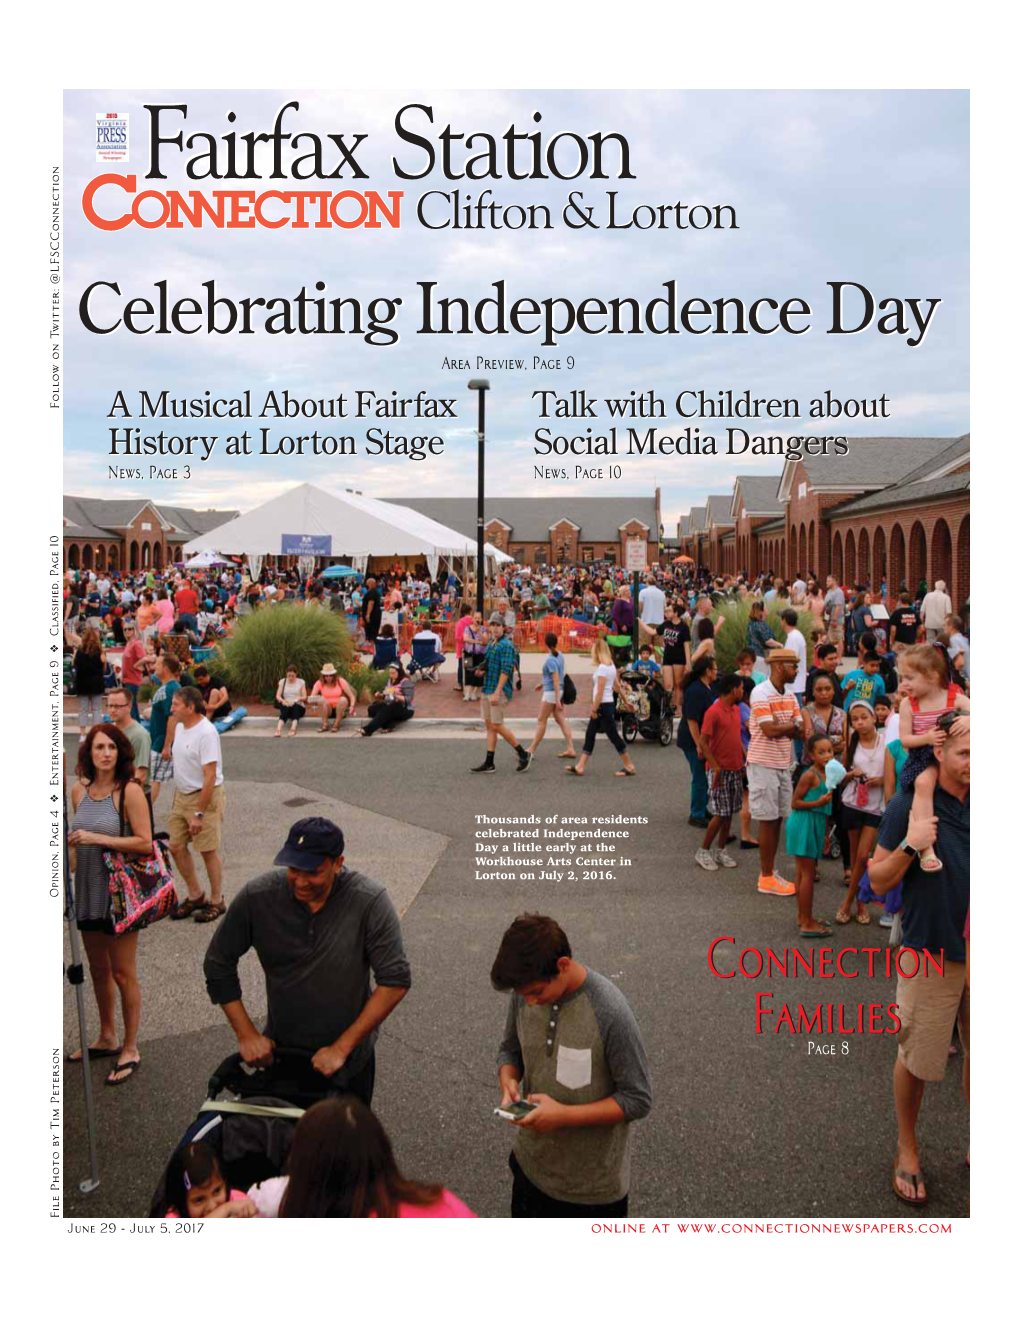 Lorton Celebratingcelebrating Independenceindependence Dayday Area Preview, Page 9